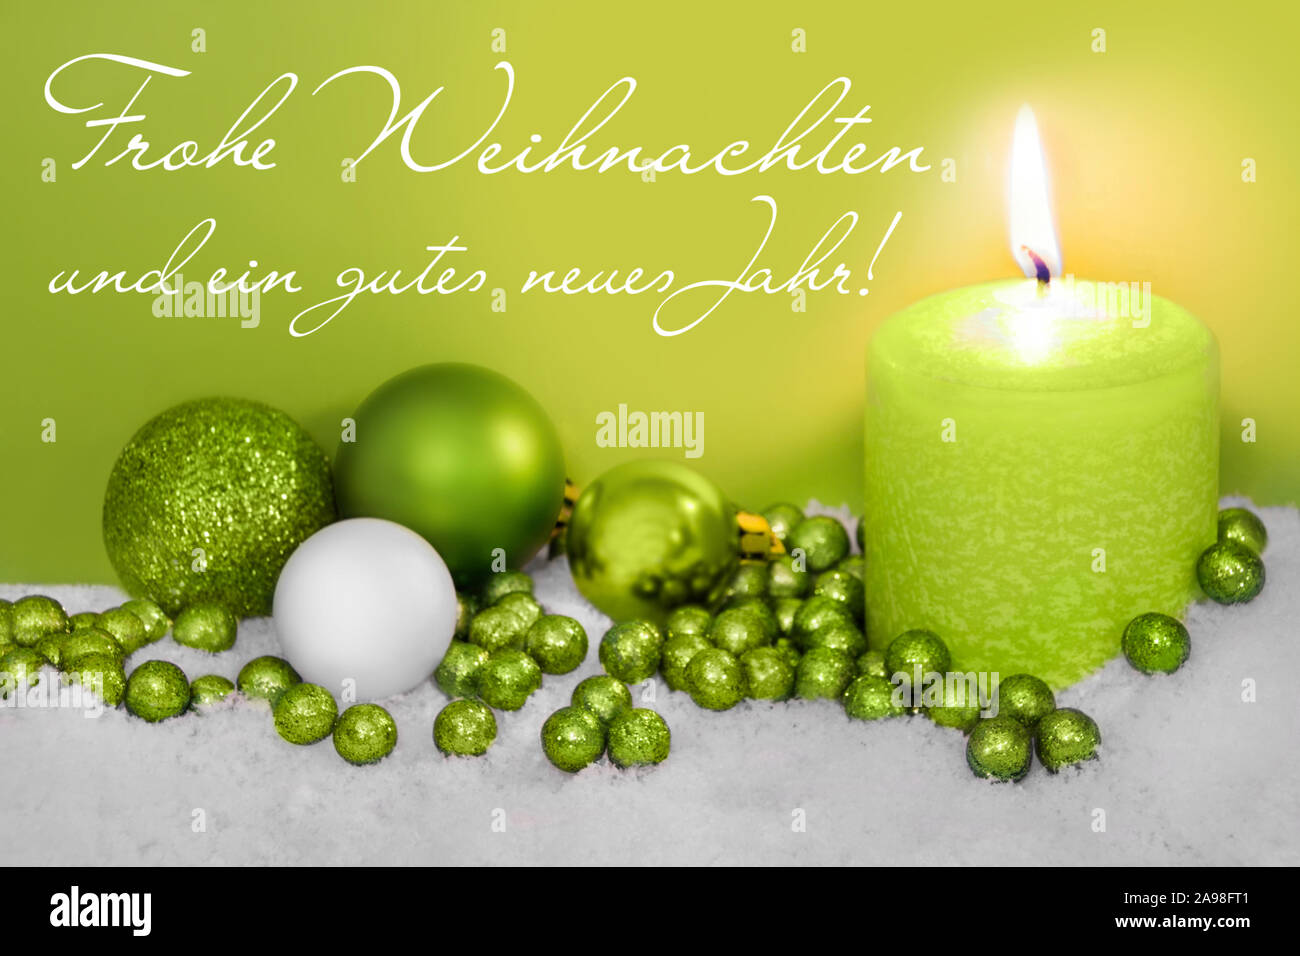 Fröhliche Weihnachten  Merry Christmas and a Happy new Year Stock Photo